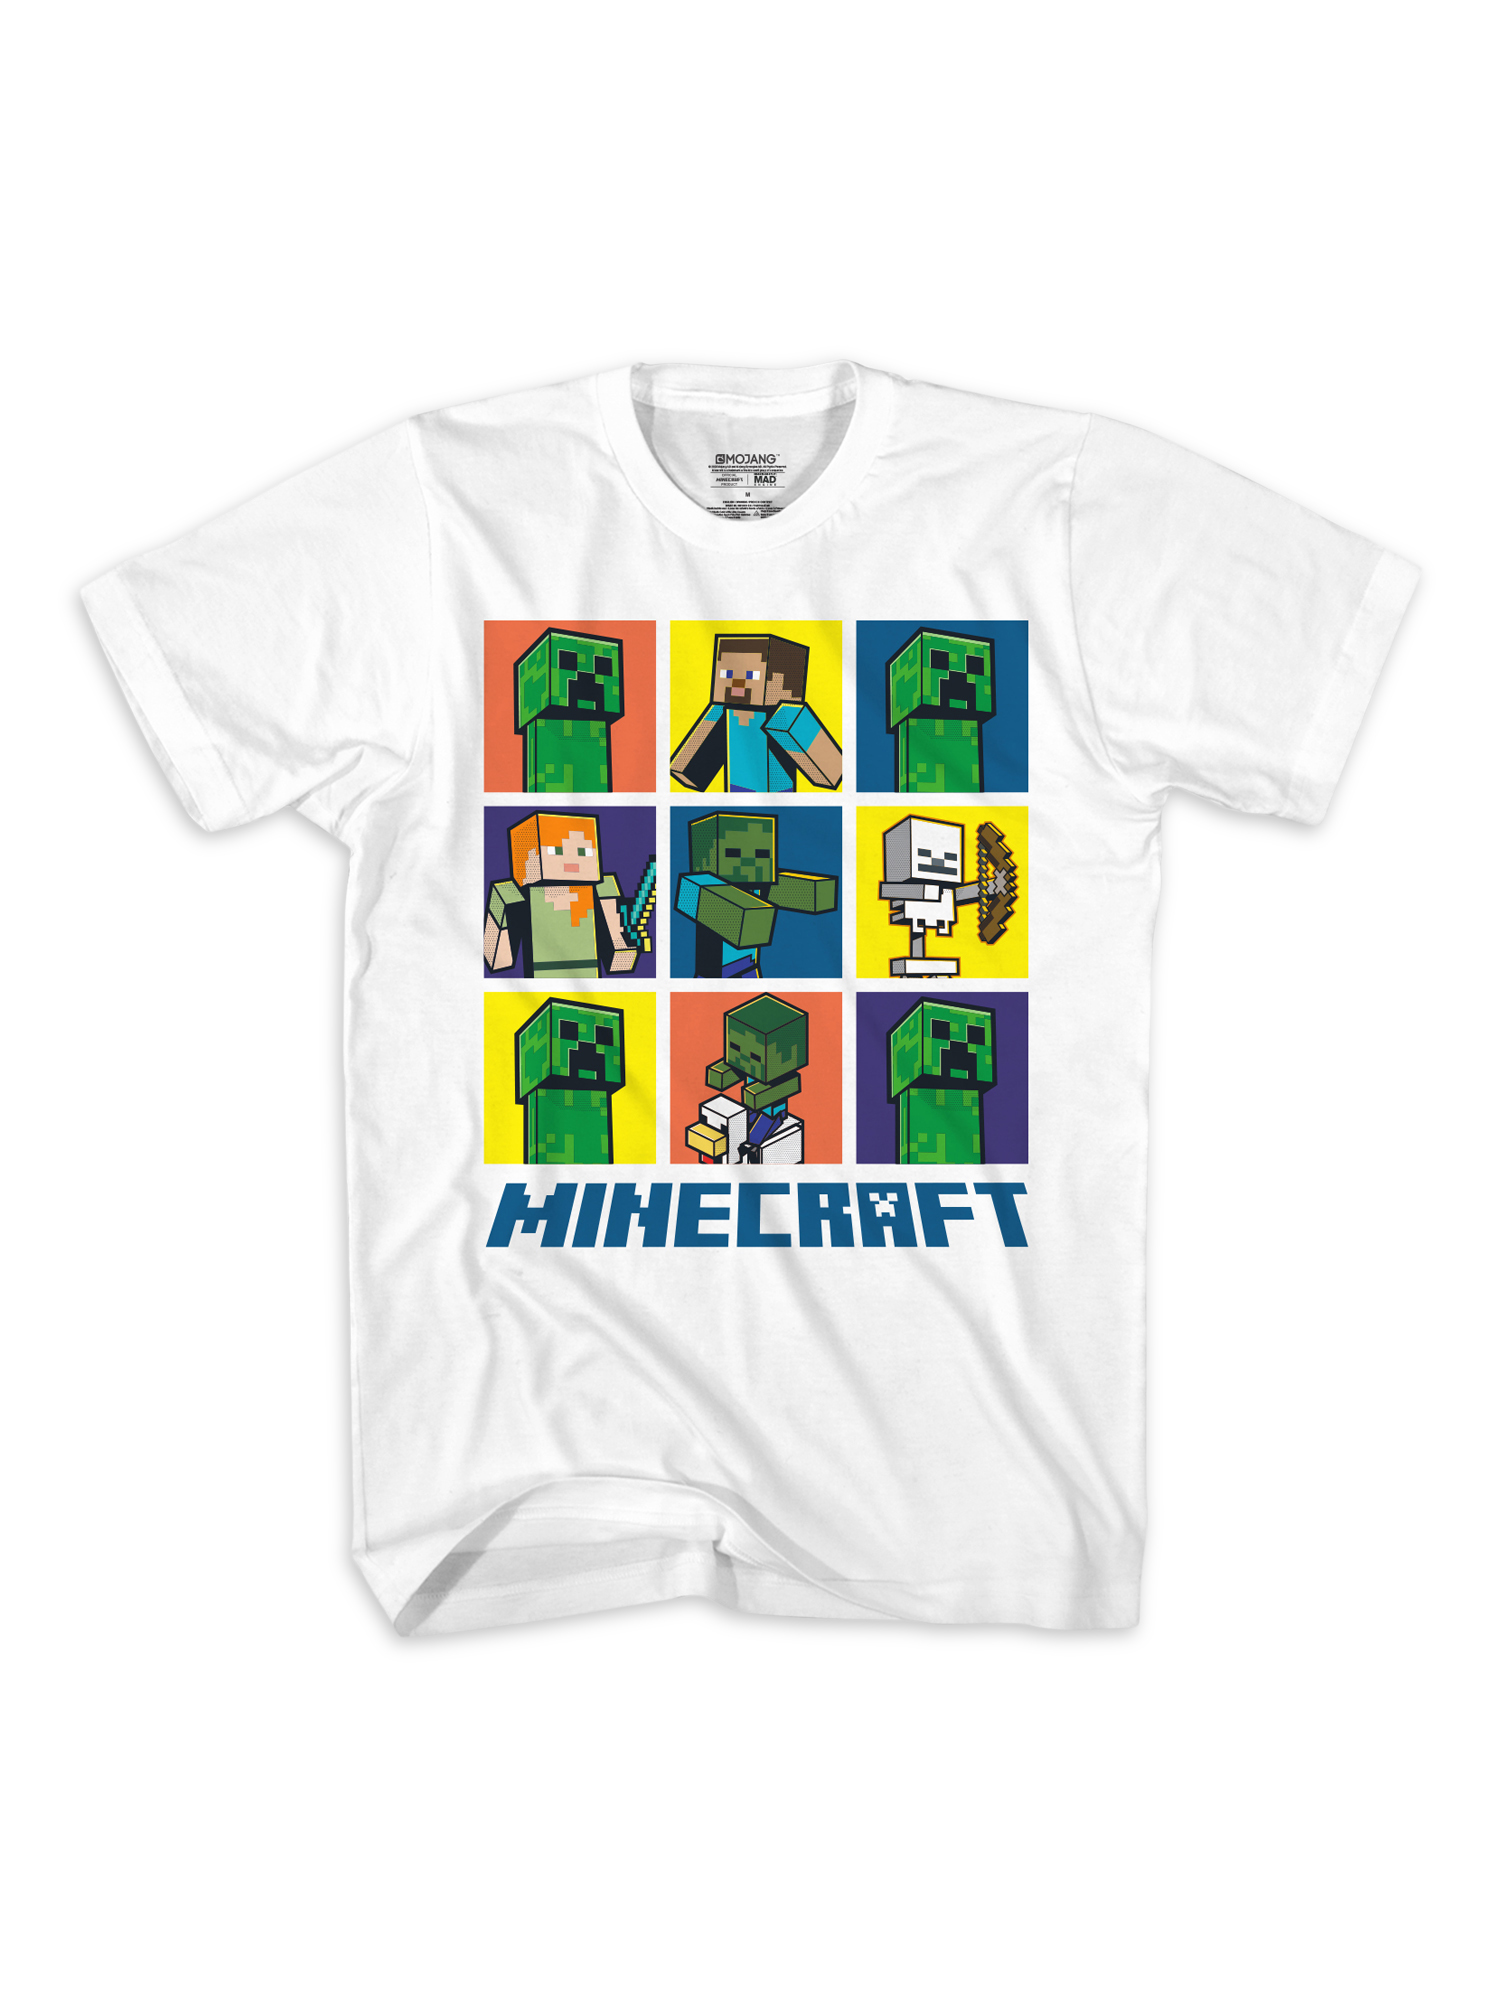 Minecraft Short Sleeve Graphic Crew Neck Relaxed Fit T-Shirt (Little Boys or Big Boys) 2 Pack - image 4 of 4